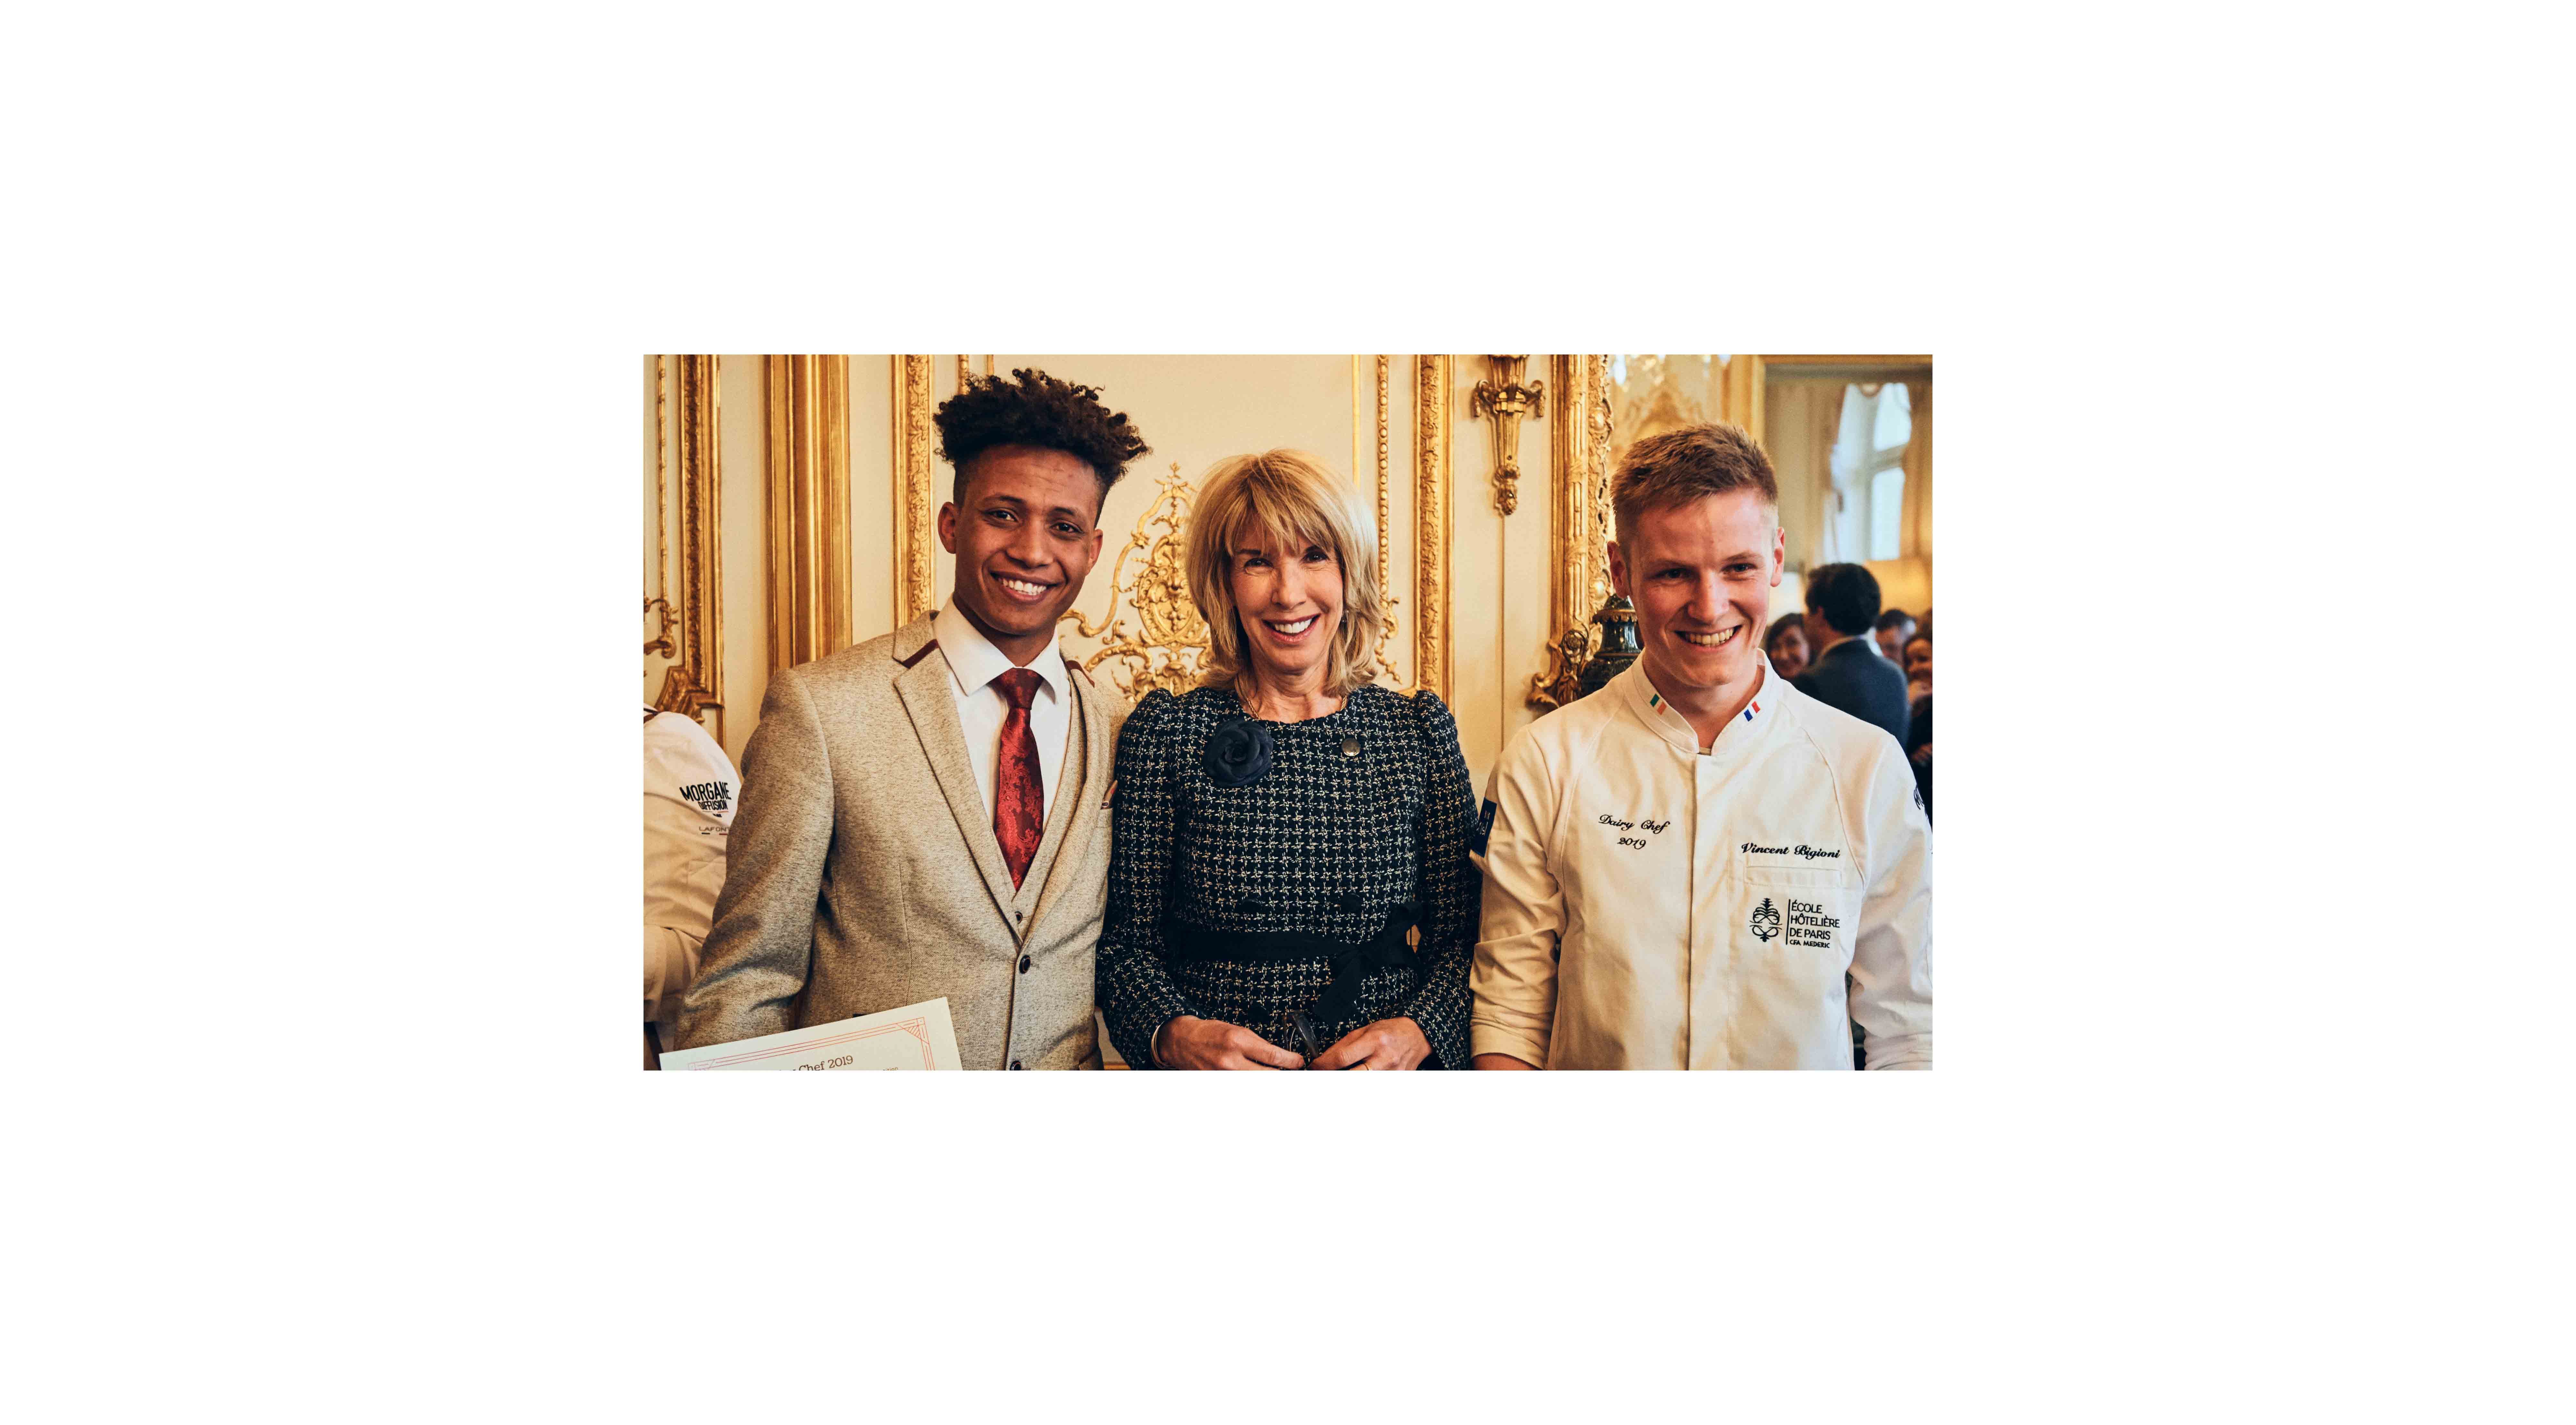 At the Irish Embassy in Paris are winning Irish student Danay Berhane from Cork Institute of Technology, HE Ms Patricia O'Brien (Irish Ambassador to France) and French winning student Vincent Bigioni from the Institut Paul Bocuse in France.